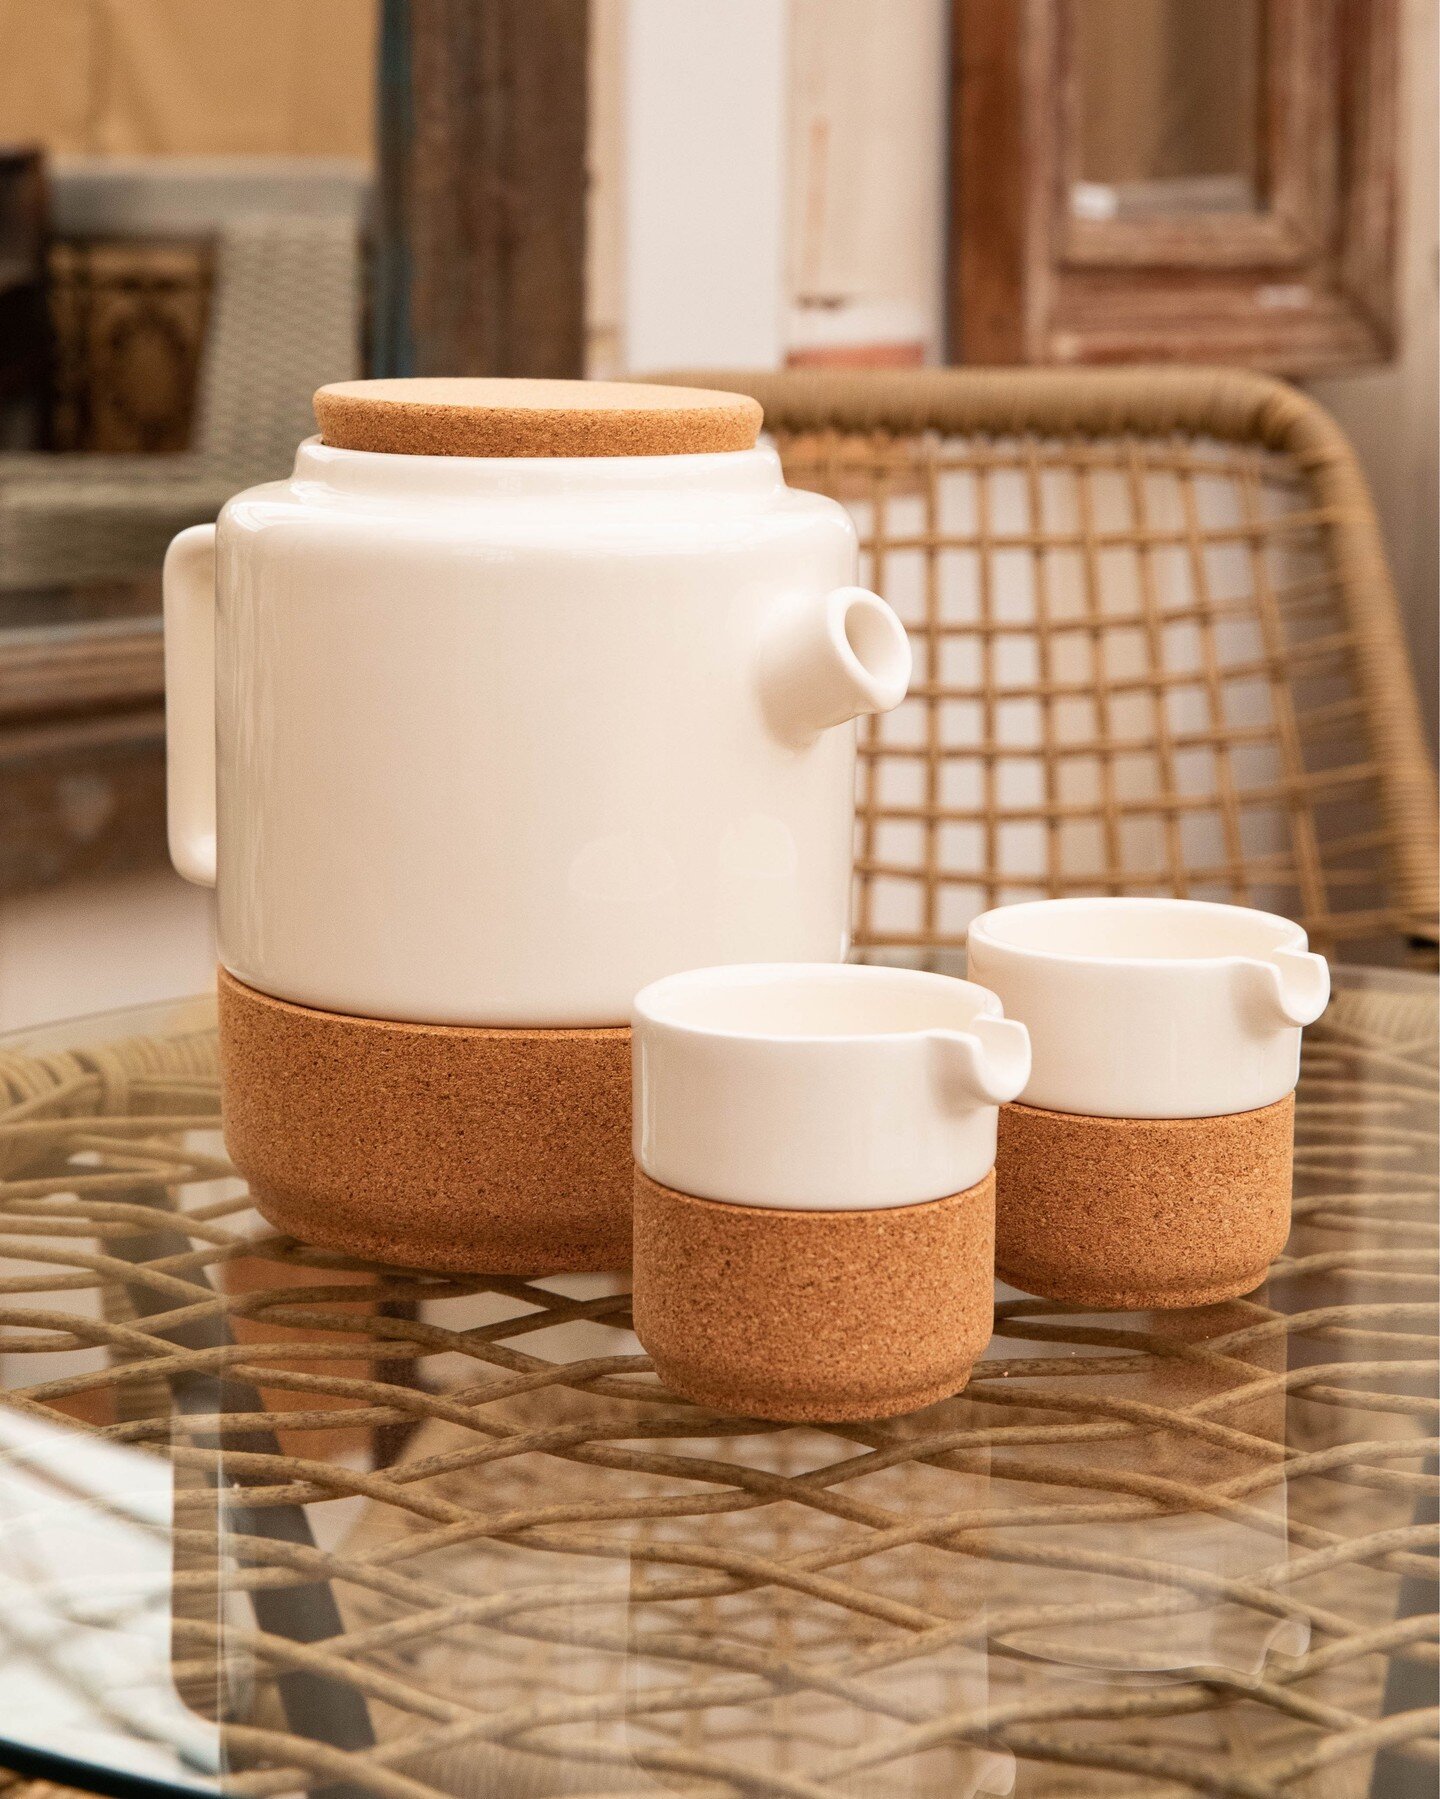 LIGA is a family-run business passionate about nature and design.

This set of two mugs and a teapot is made using a blend of ceramics and cork and is one of our &ldquo;September Picks&rdquo; on our website.  The eco cork is harvested once every nine